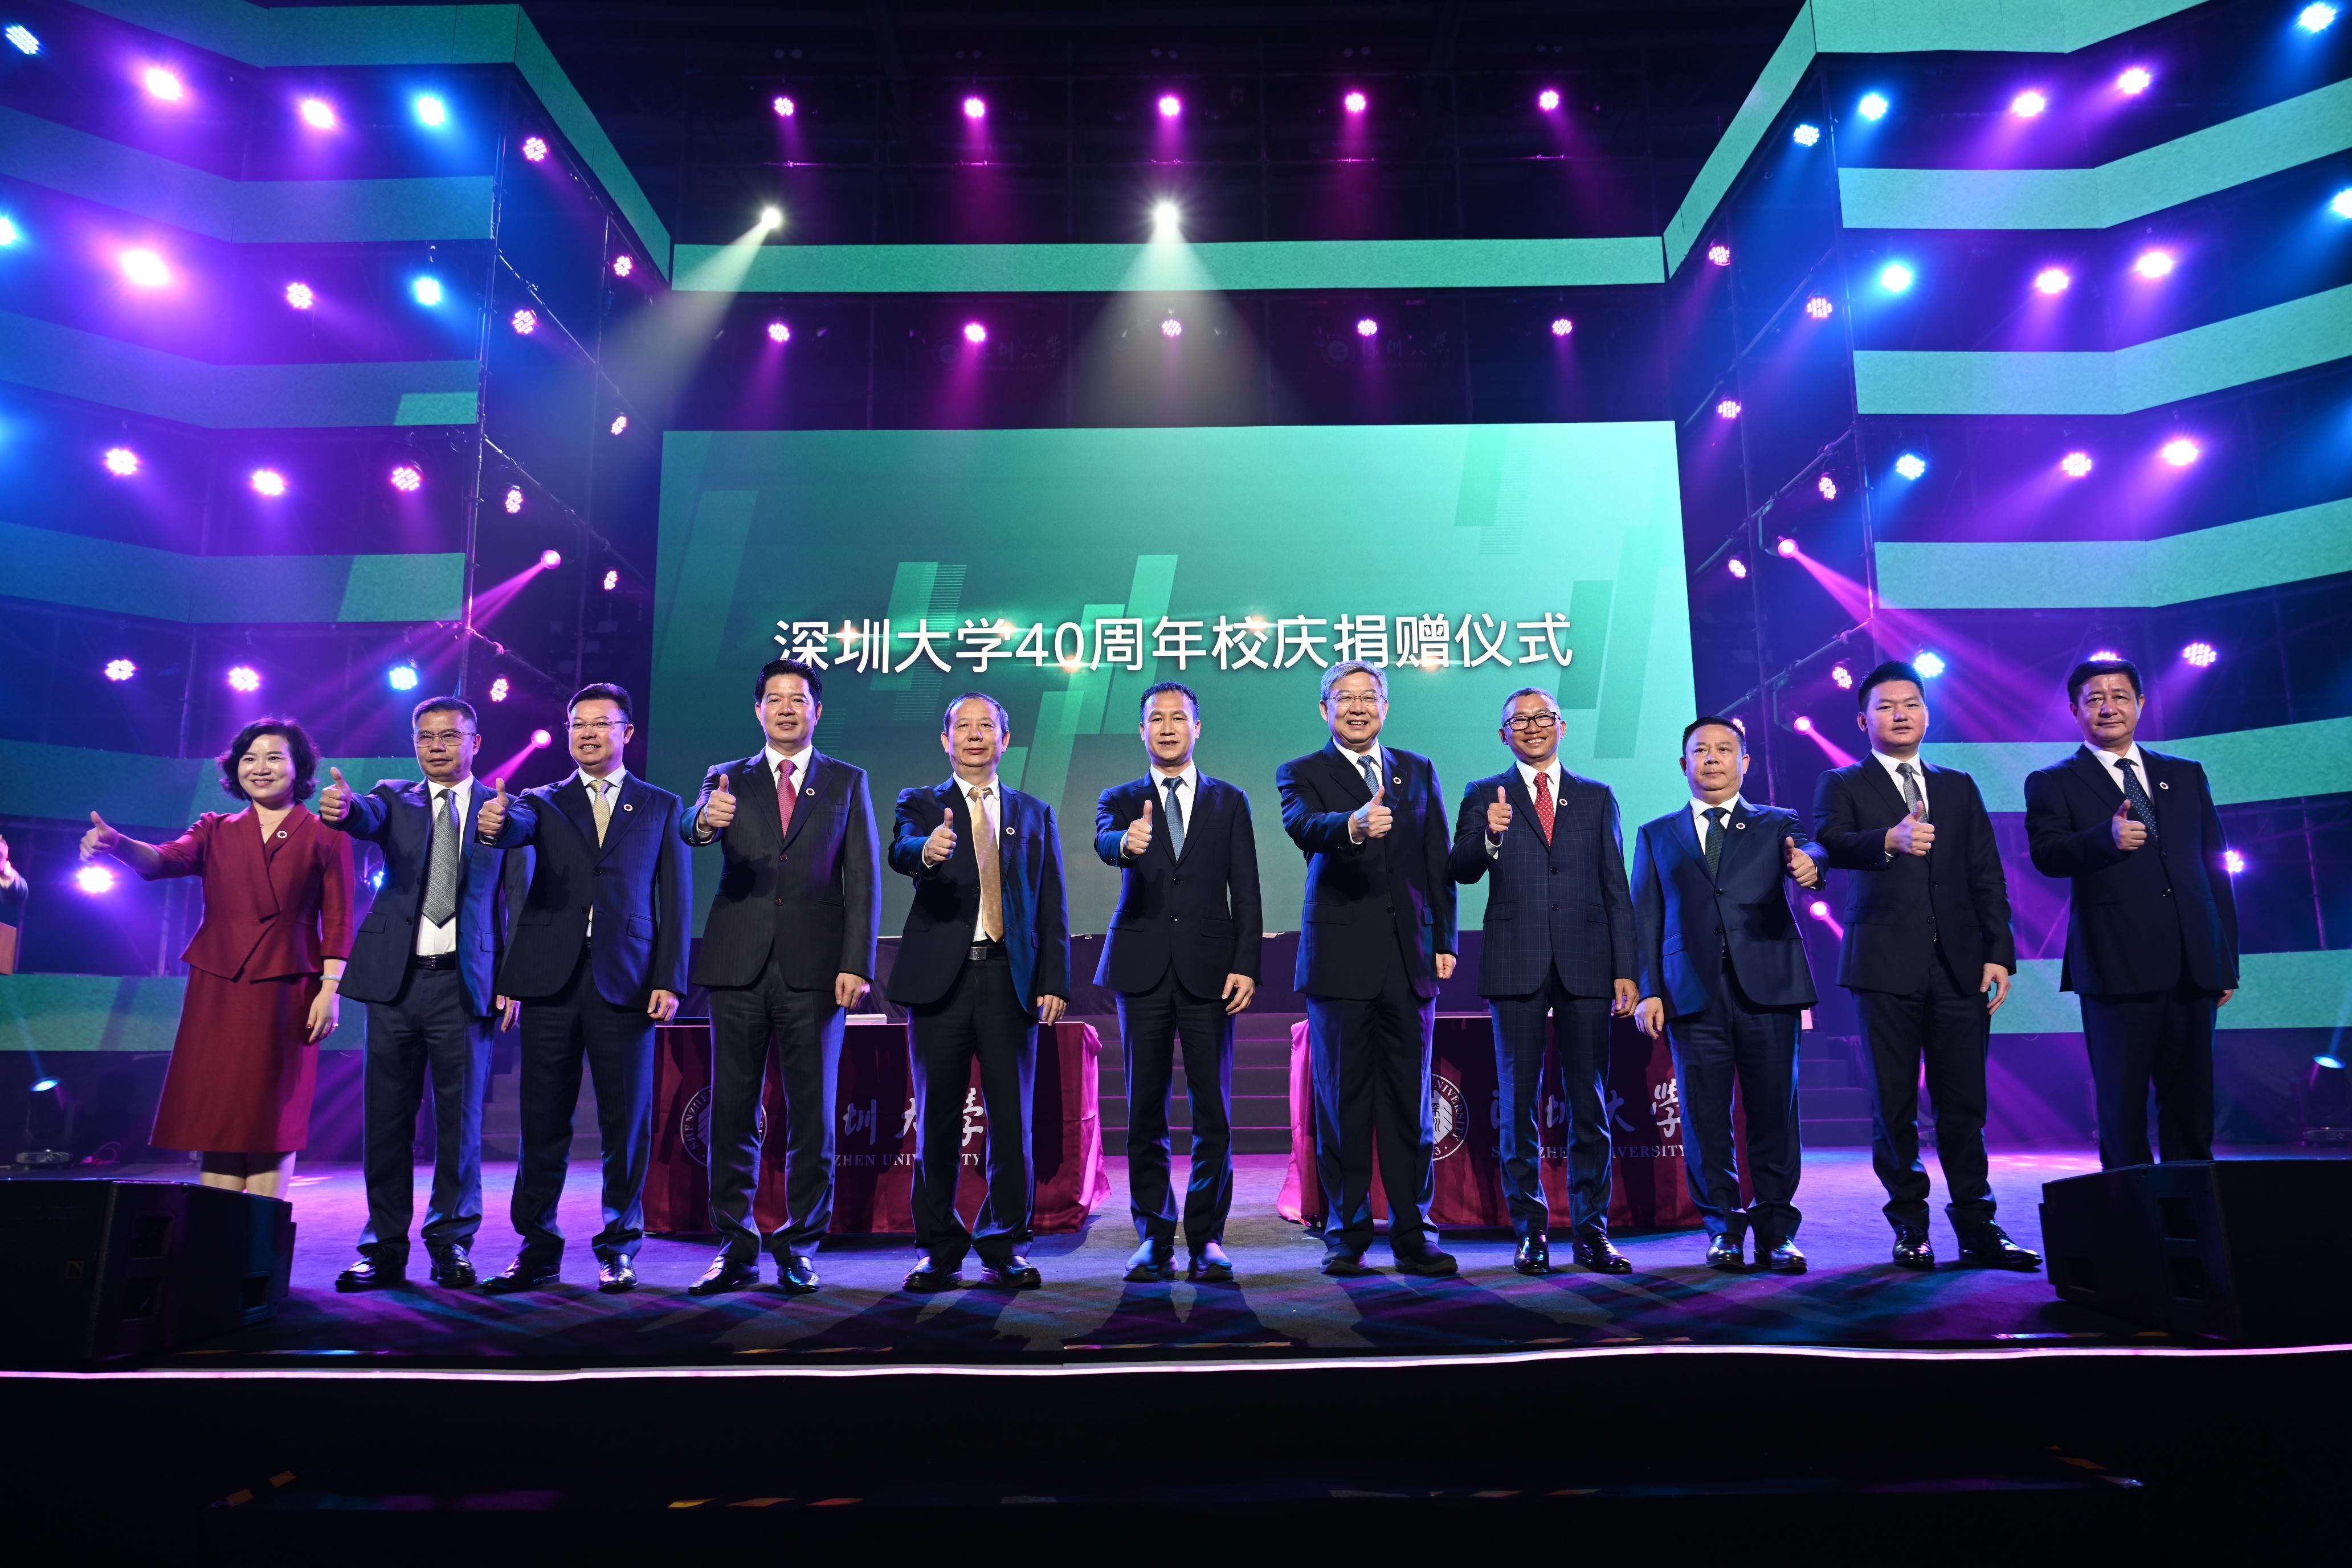 Shenzhen University Held 40th Anniversary Donation Ceremony, "Voice of the Coast" Concert